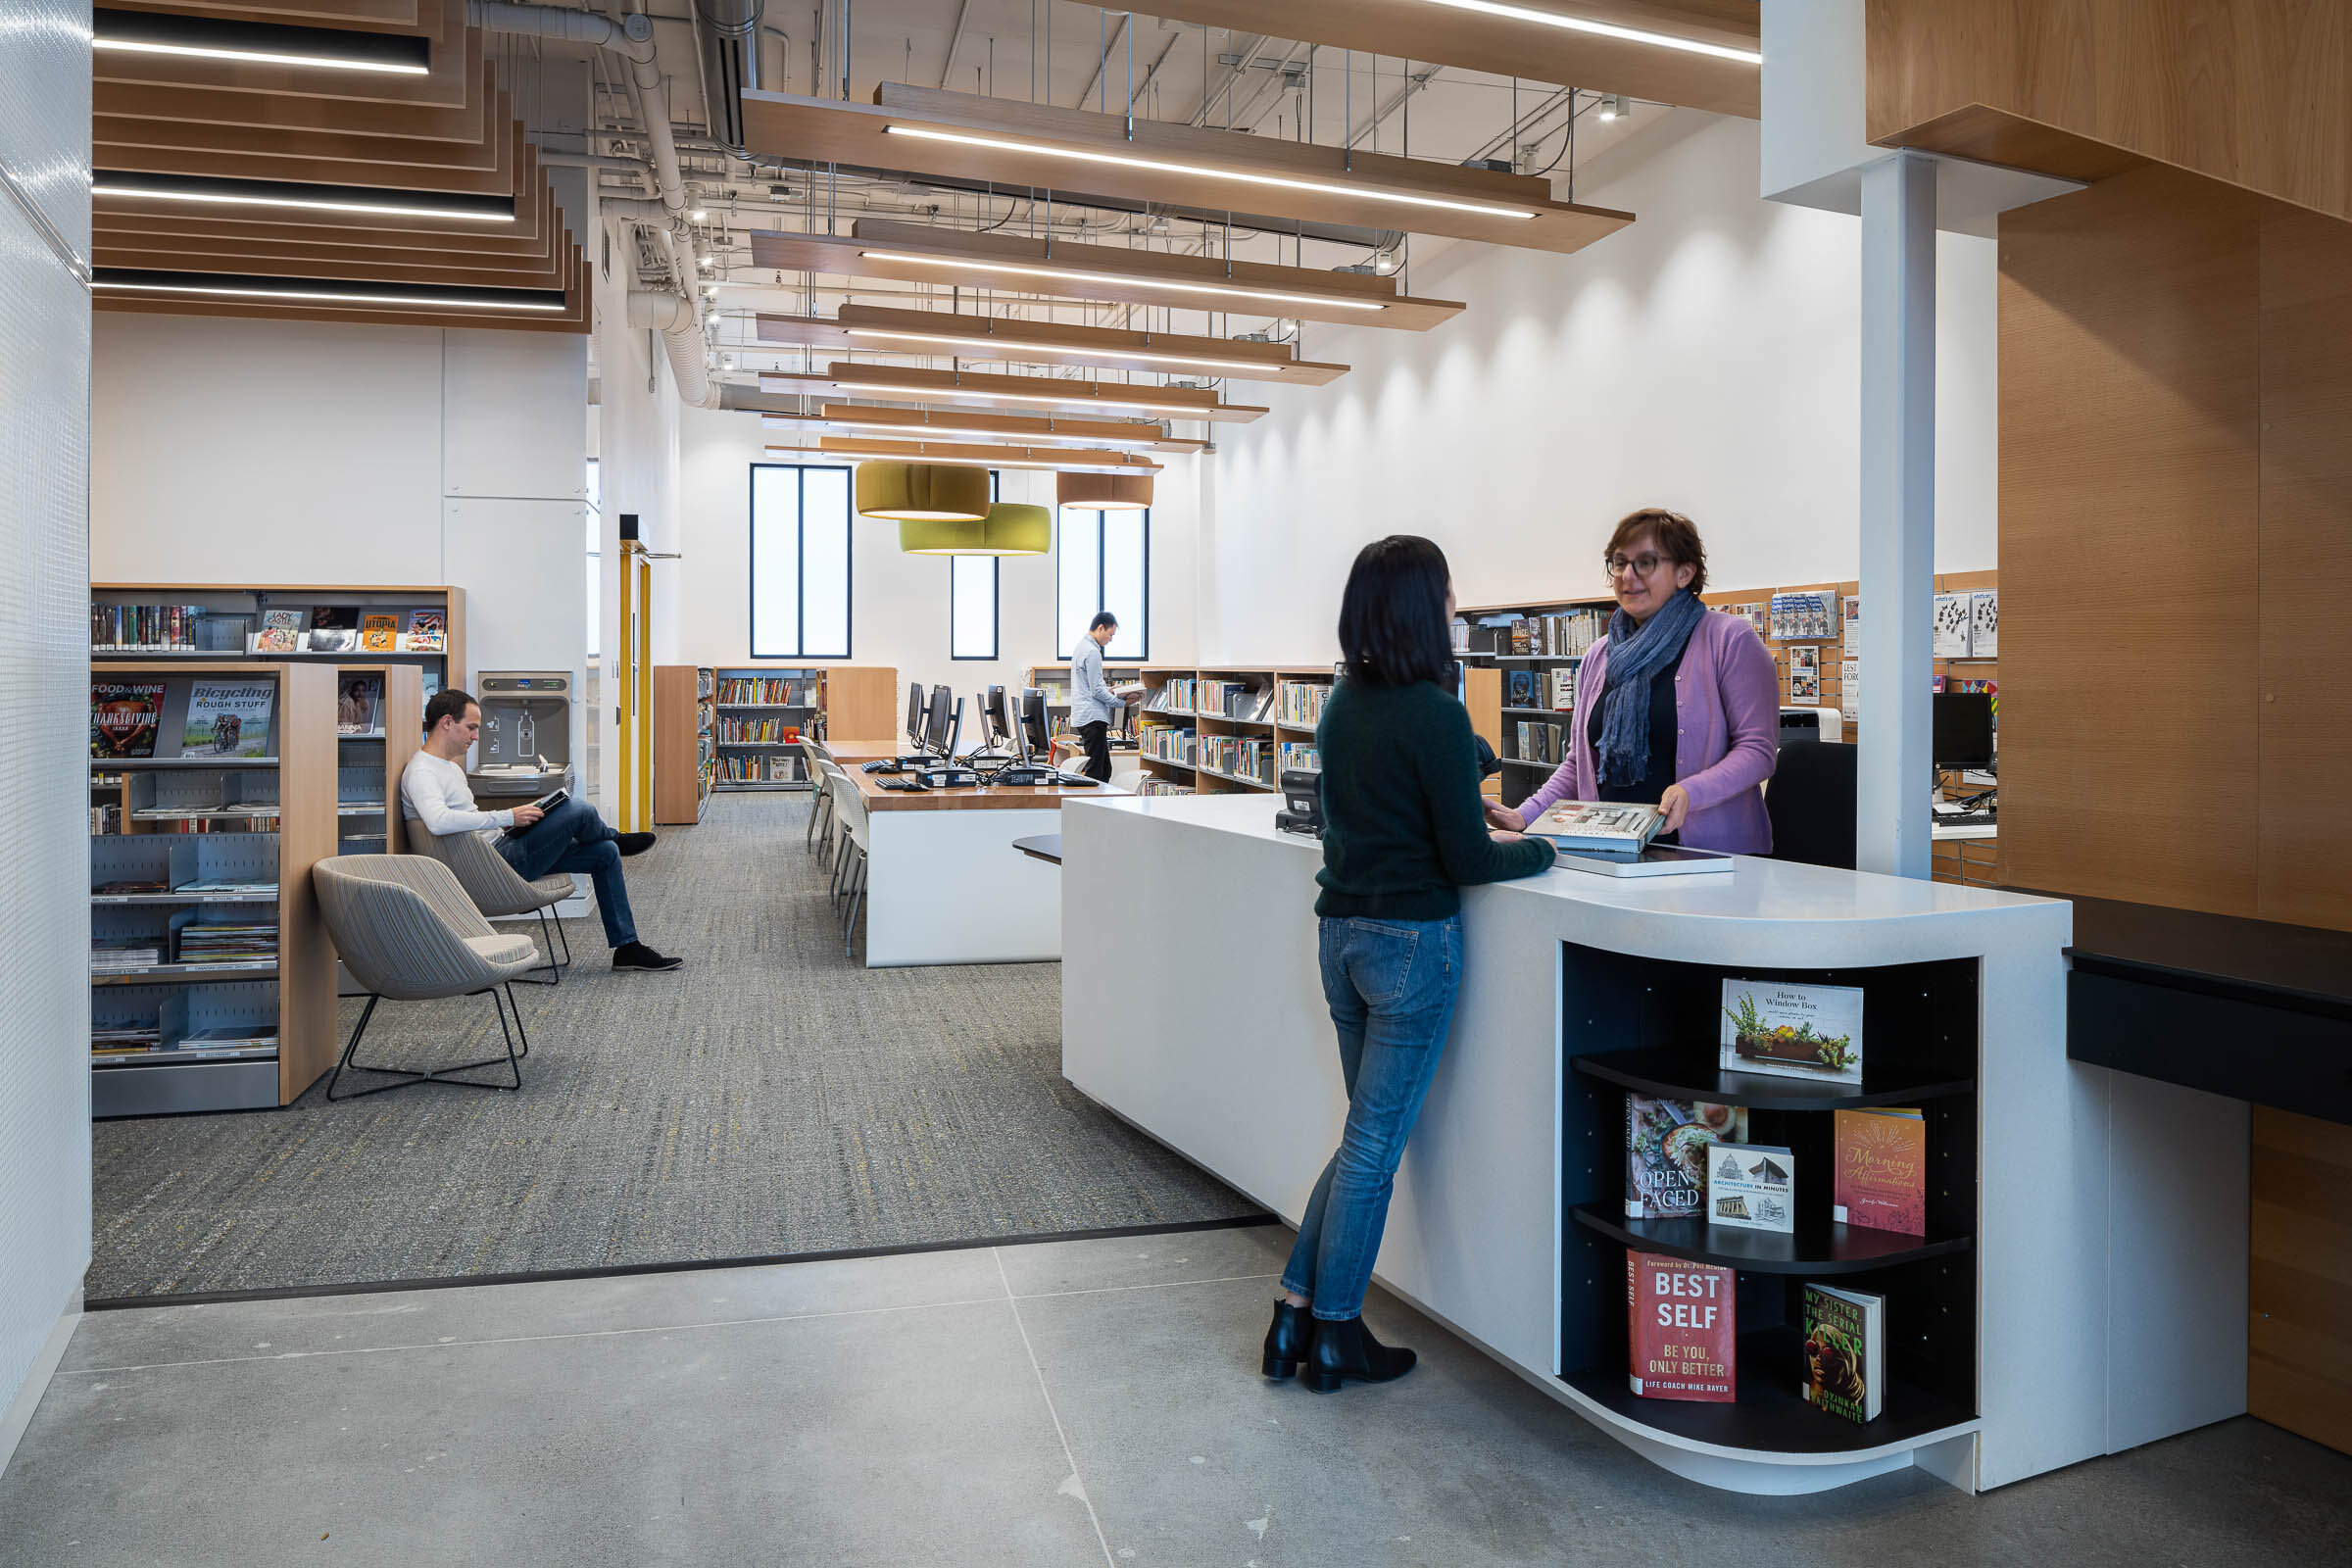 St Clair/Silverthorn Library